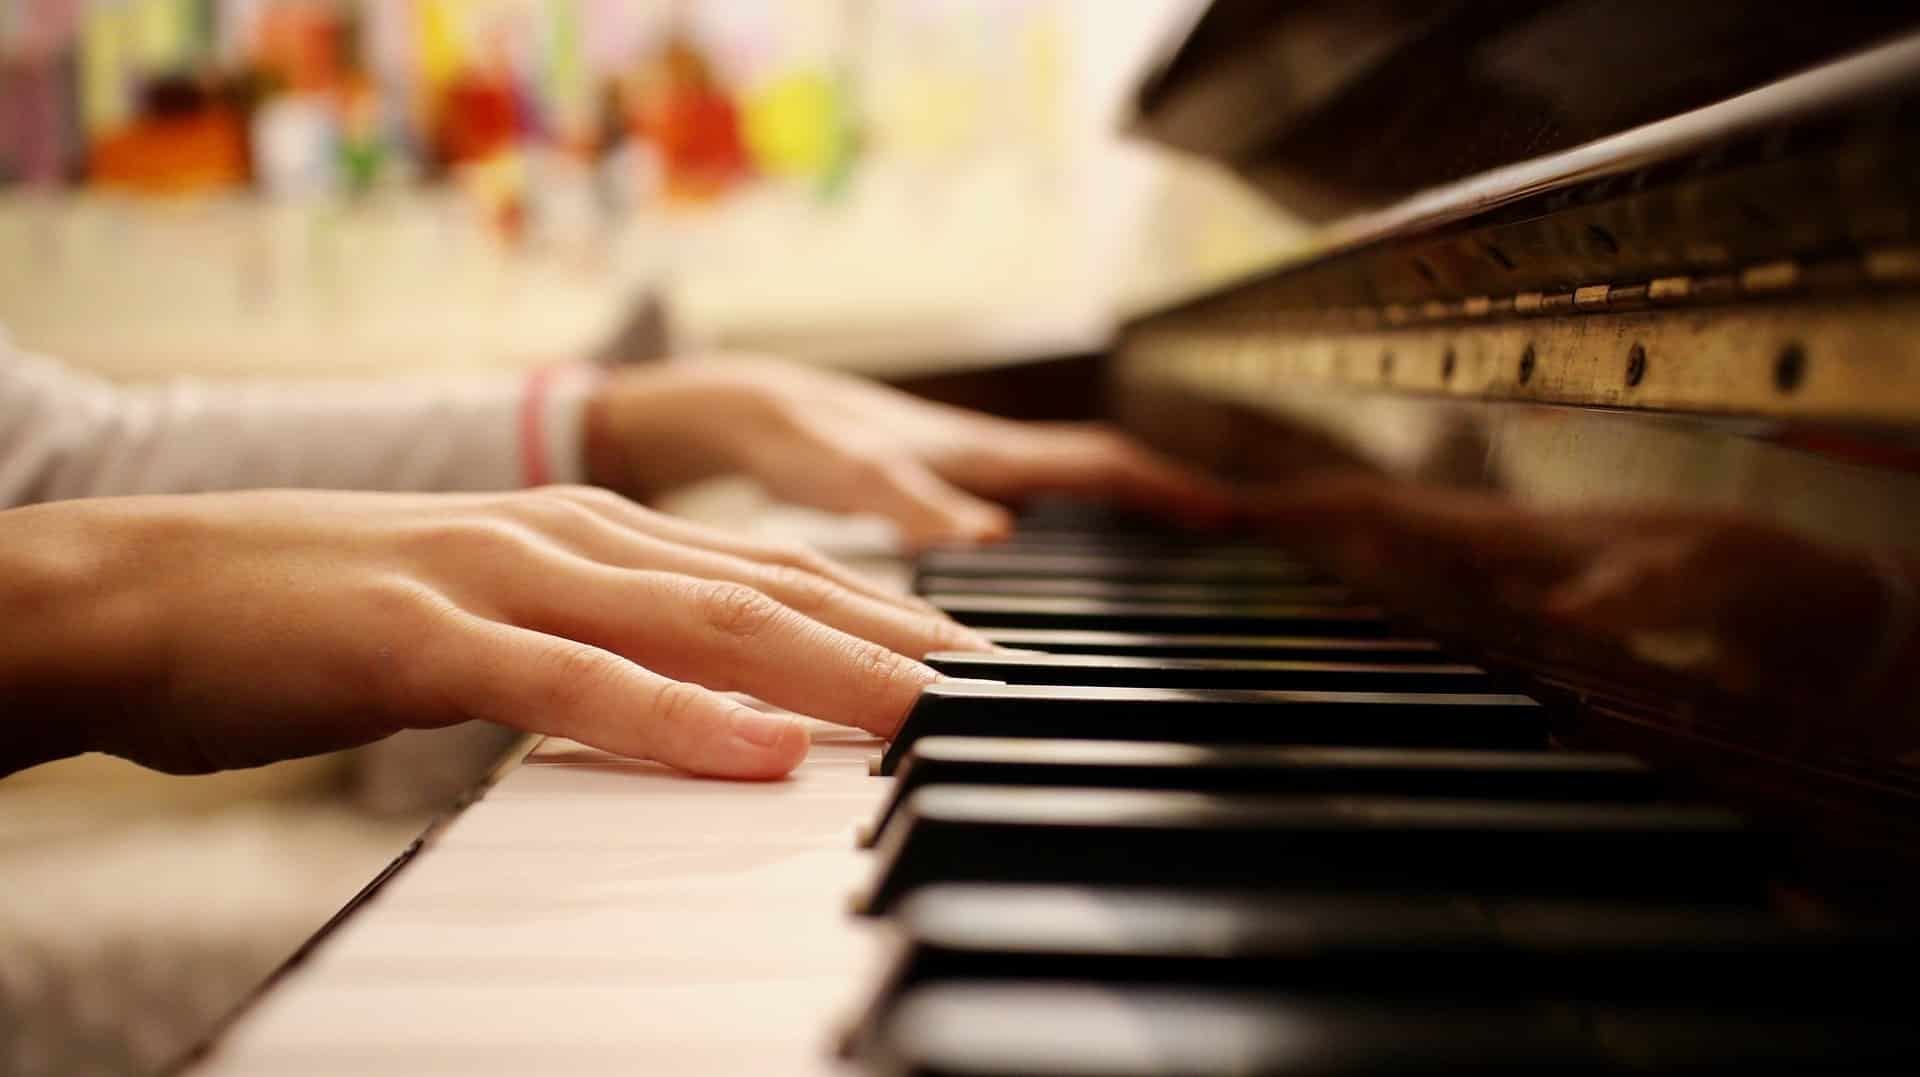 Our Favorite List of Kid's Piano Games